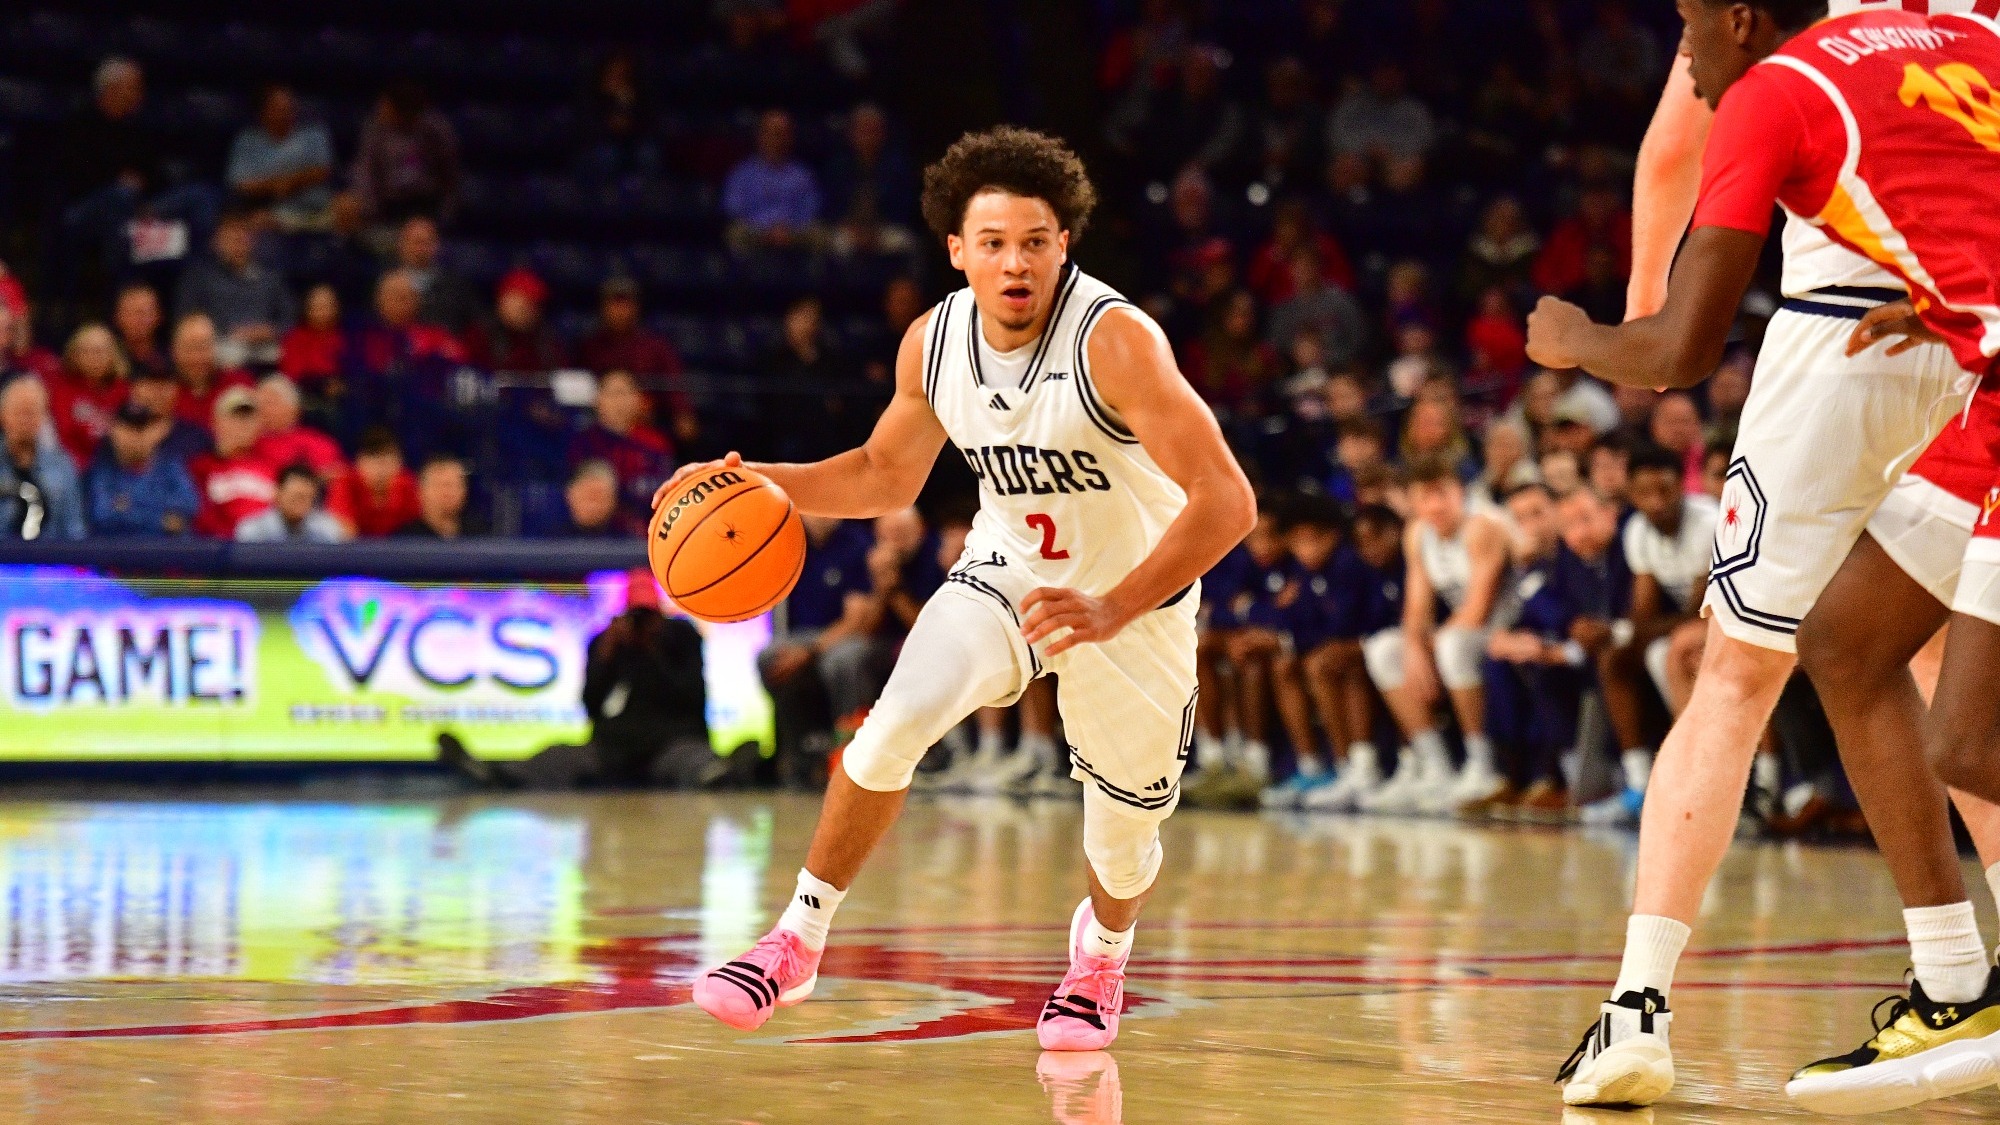 Richmond's Jordan King has been one of the best transfers of the year early on so far in the 2023-24 college basketball season.